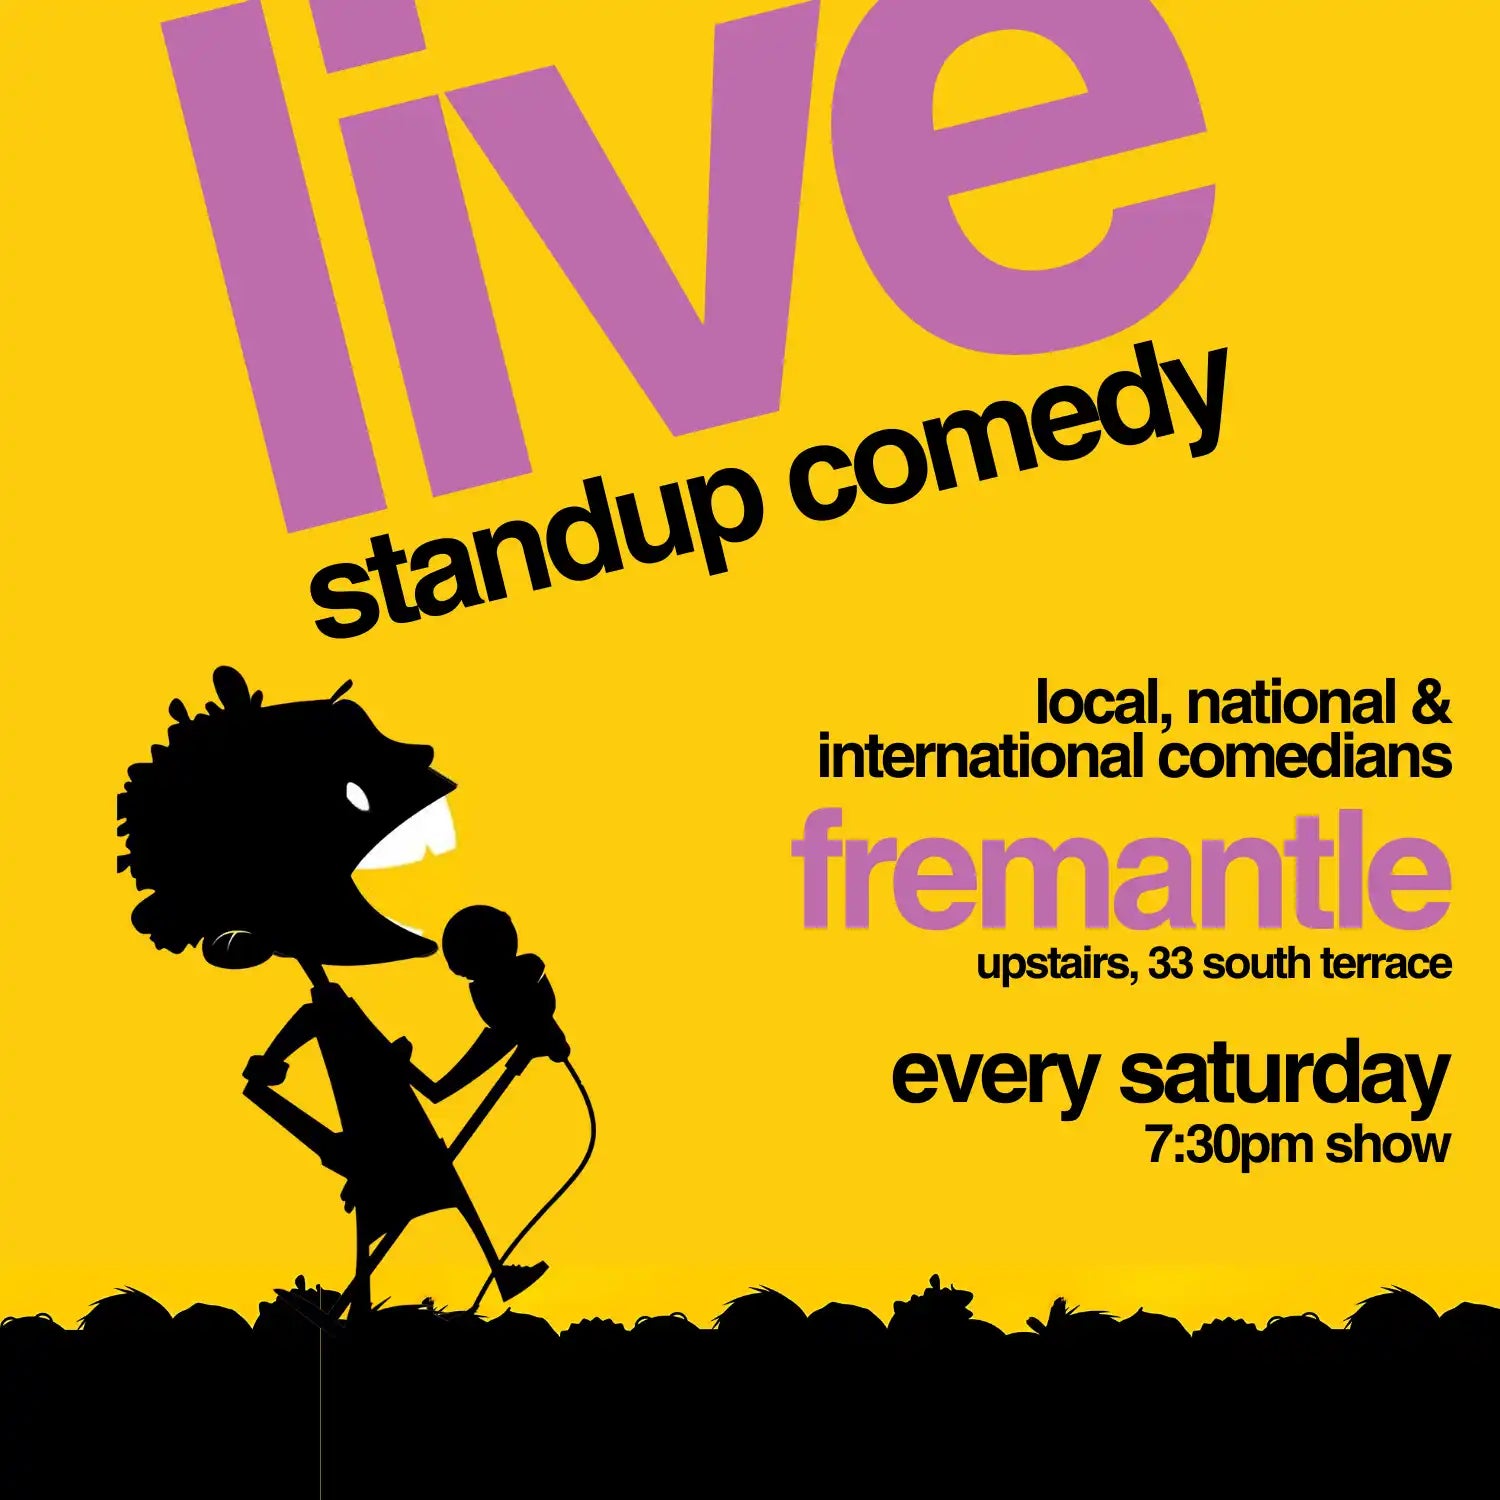 Buy tickets for the Fremantle weekend comedy show at Comedy Lounge, featuring top local, national, and international comedians.